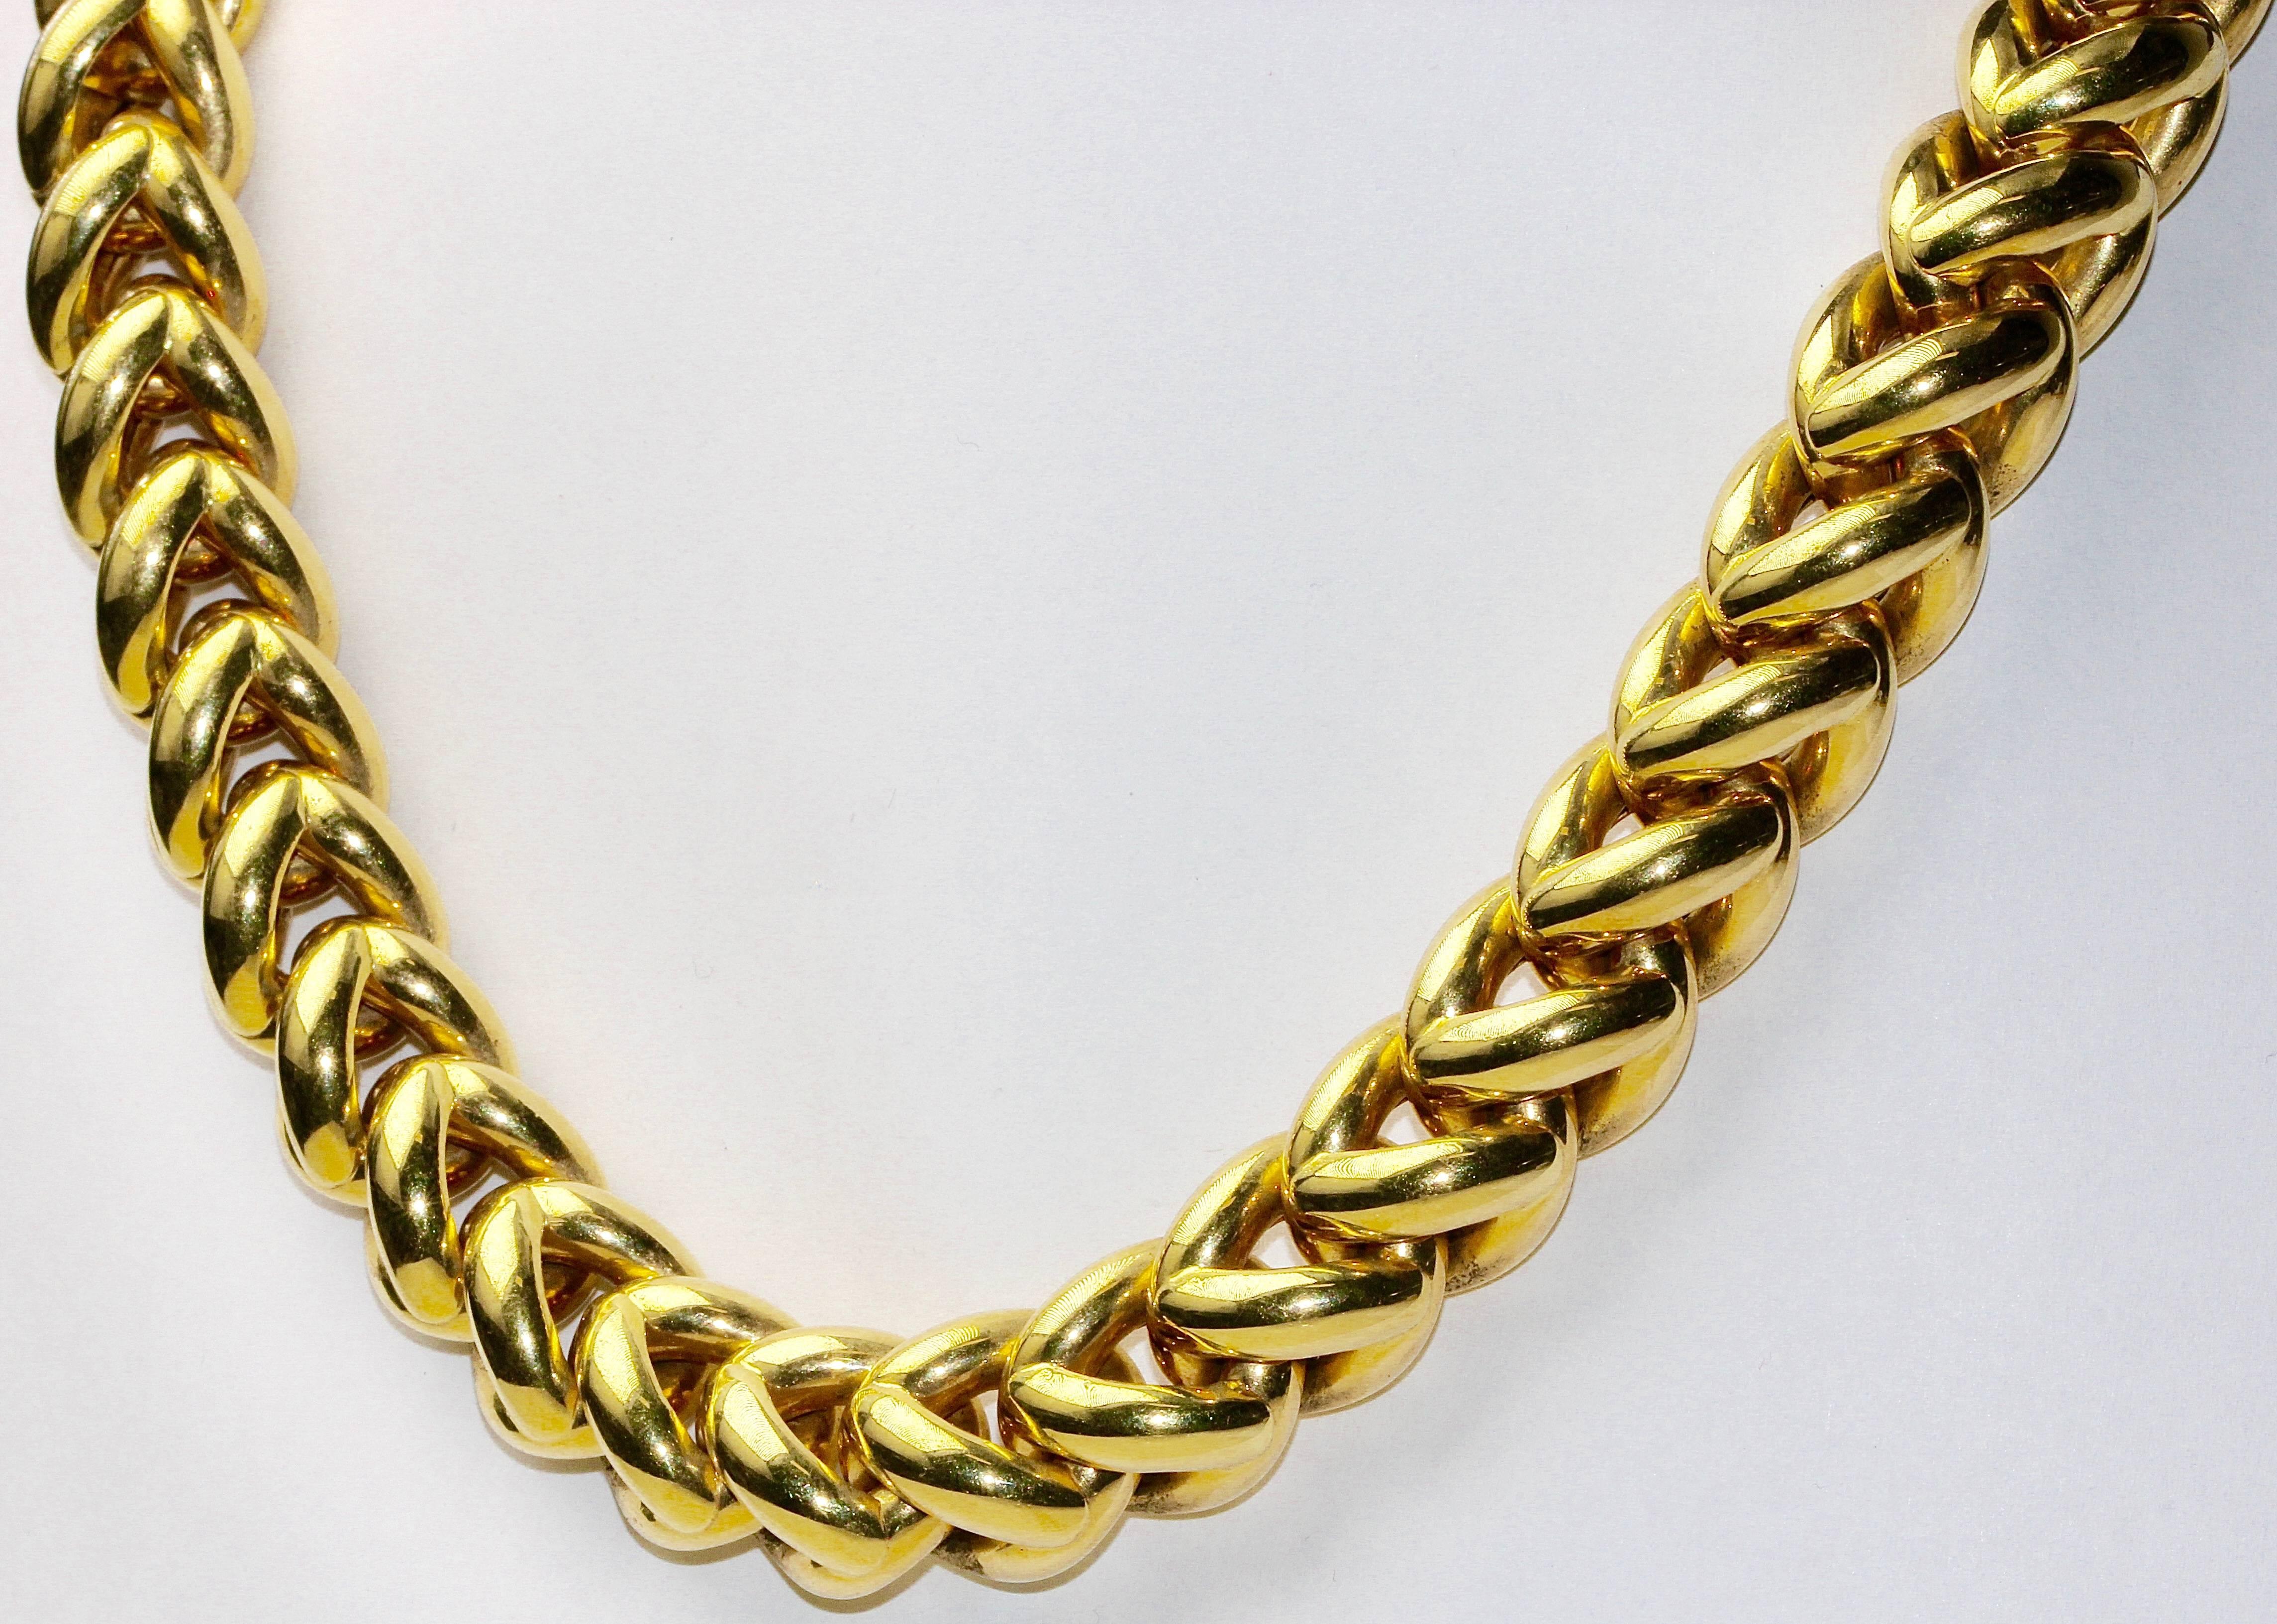 High quality, solid necklace, 18k gold. Made by the world famous jeweler and goldsmith WEMPE.

Total length: 460mm
Thickness approx. 9.5 mm x 14.5 mm
Total weight 123.2 grams